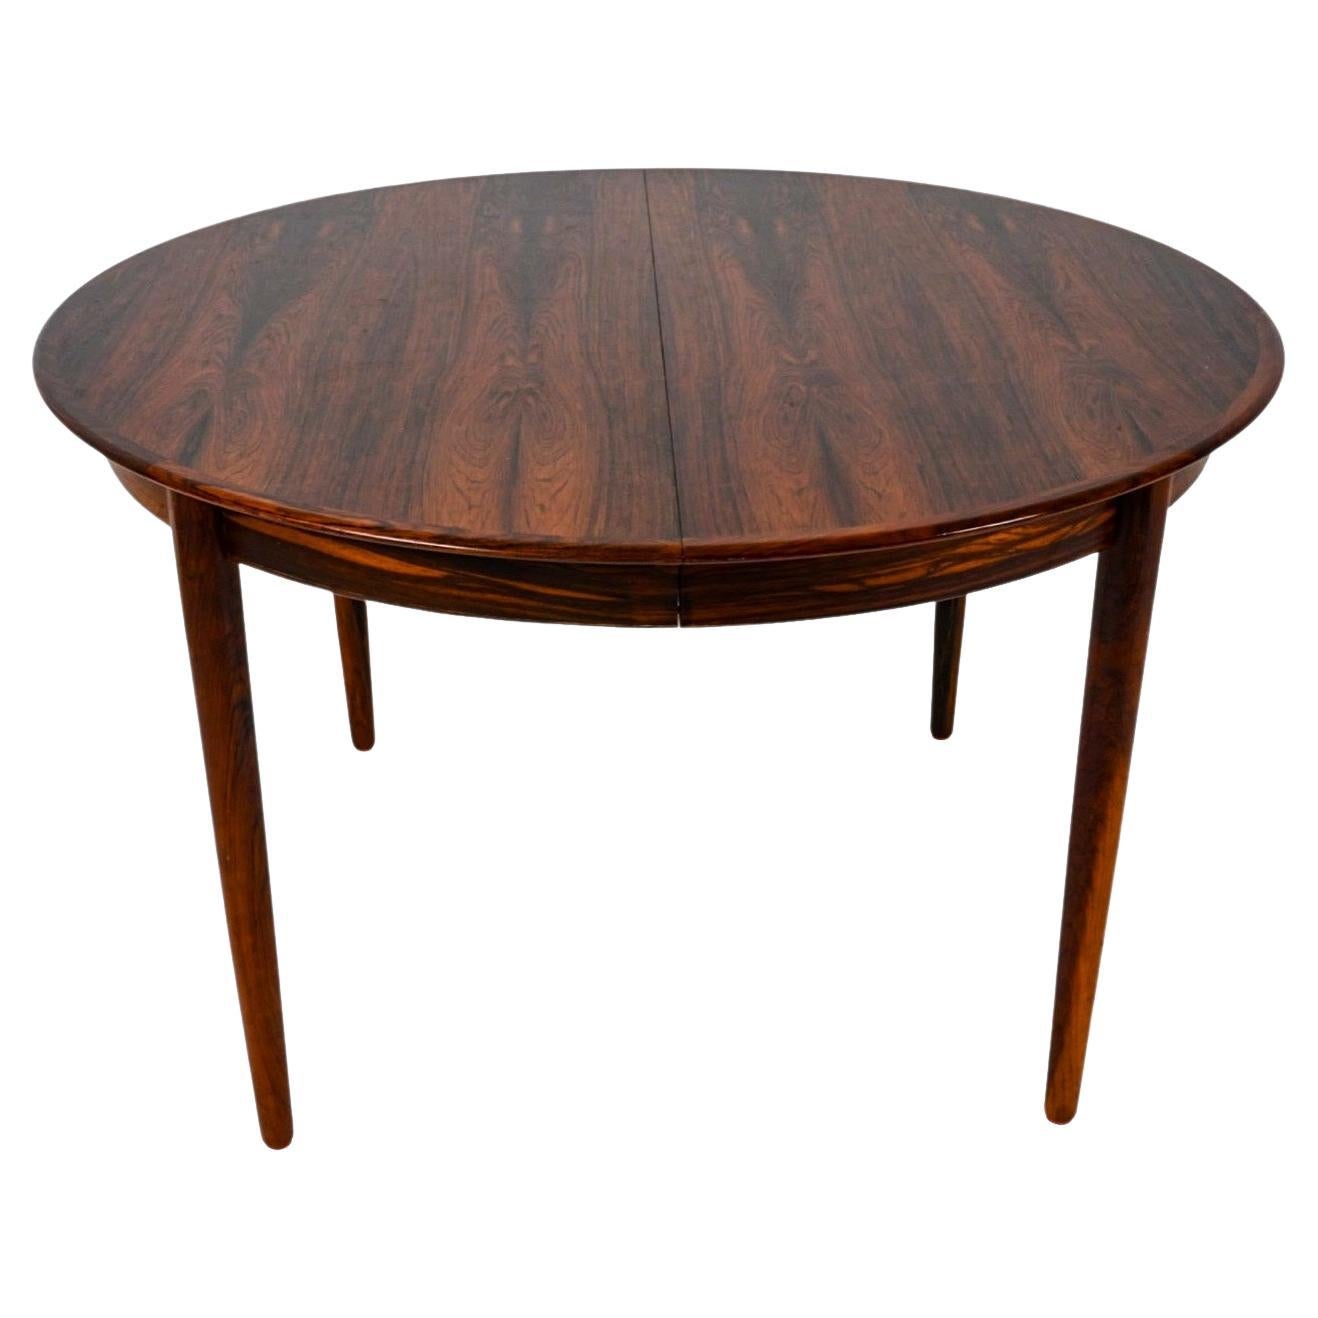 Danish Modern Arne Vodder Style Rosewood Dining Table W/ 4 Leaves  For Sale